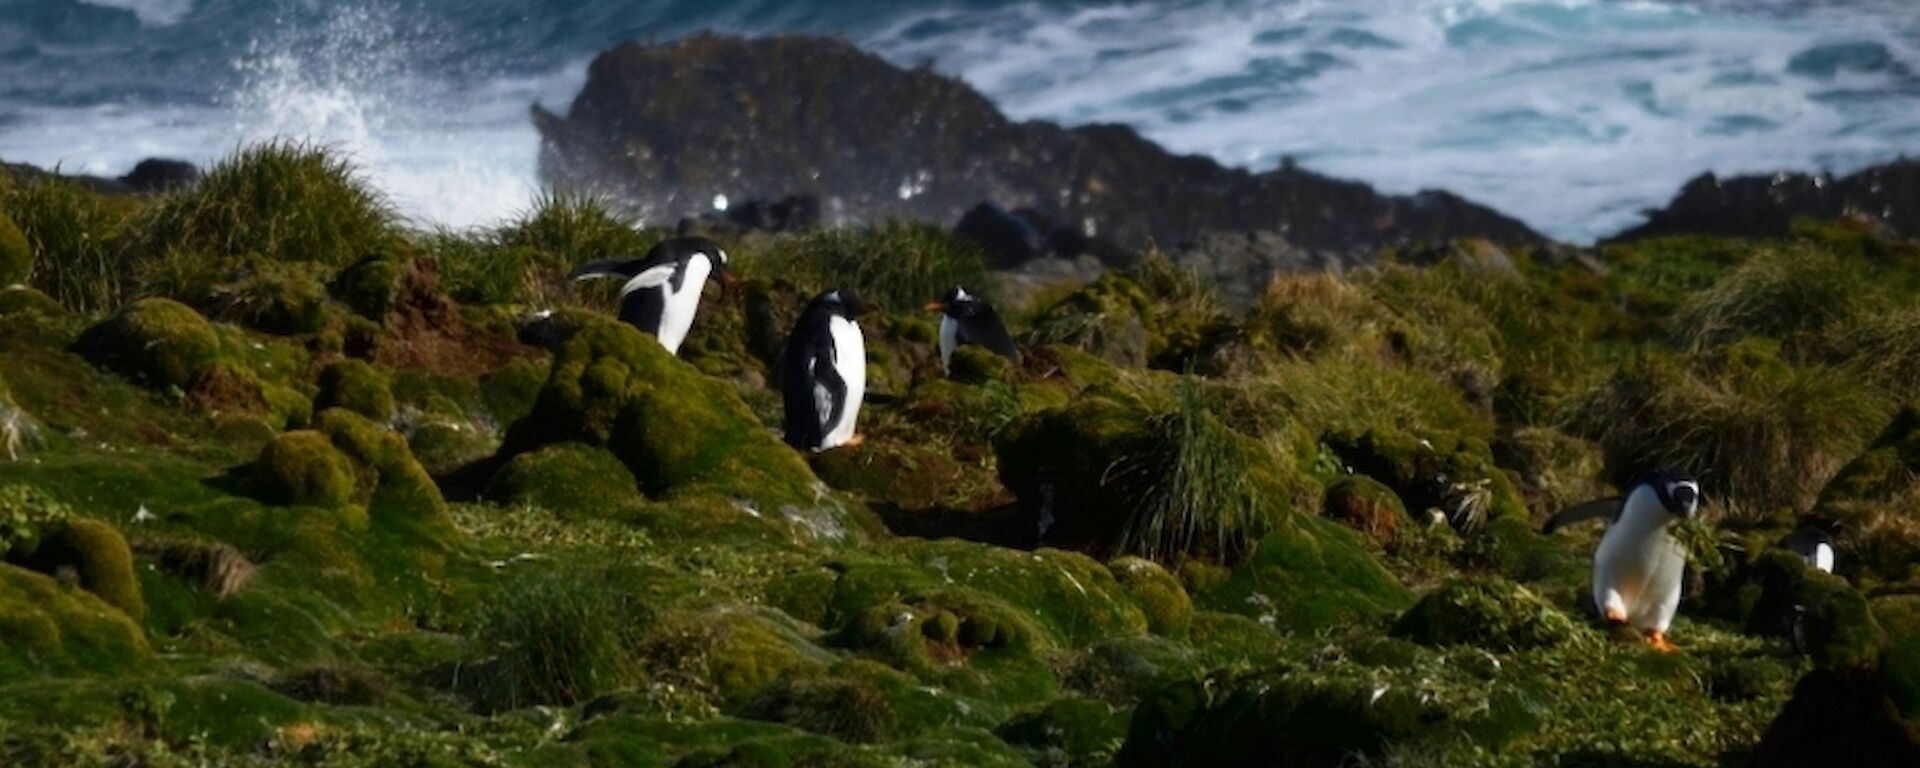 Several gentoo penguins ‘play nesting’ on the rugged west coast near Eagle Bay.